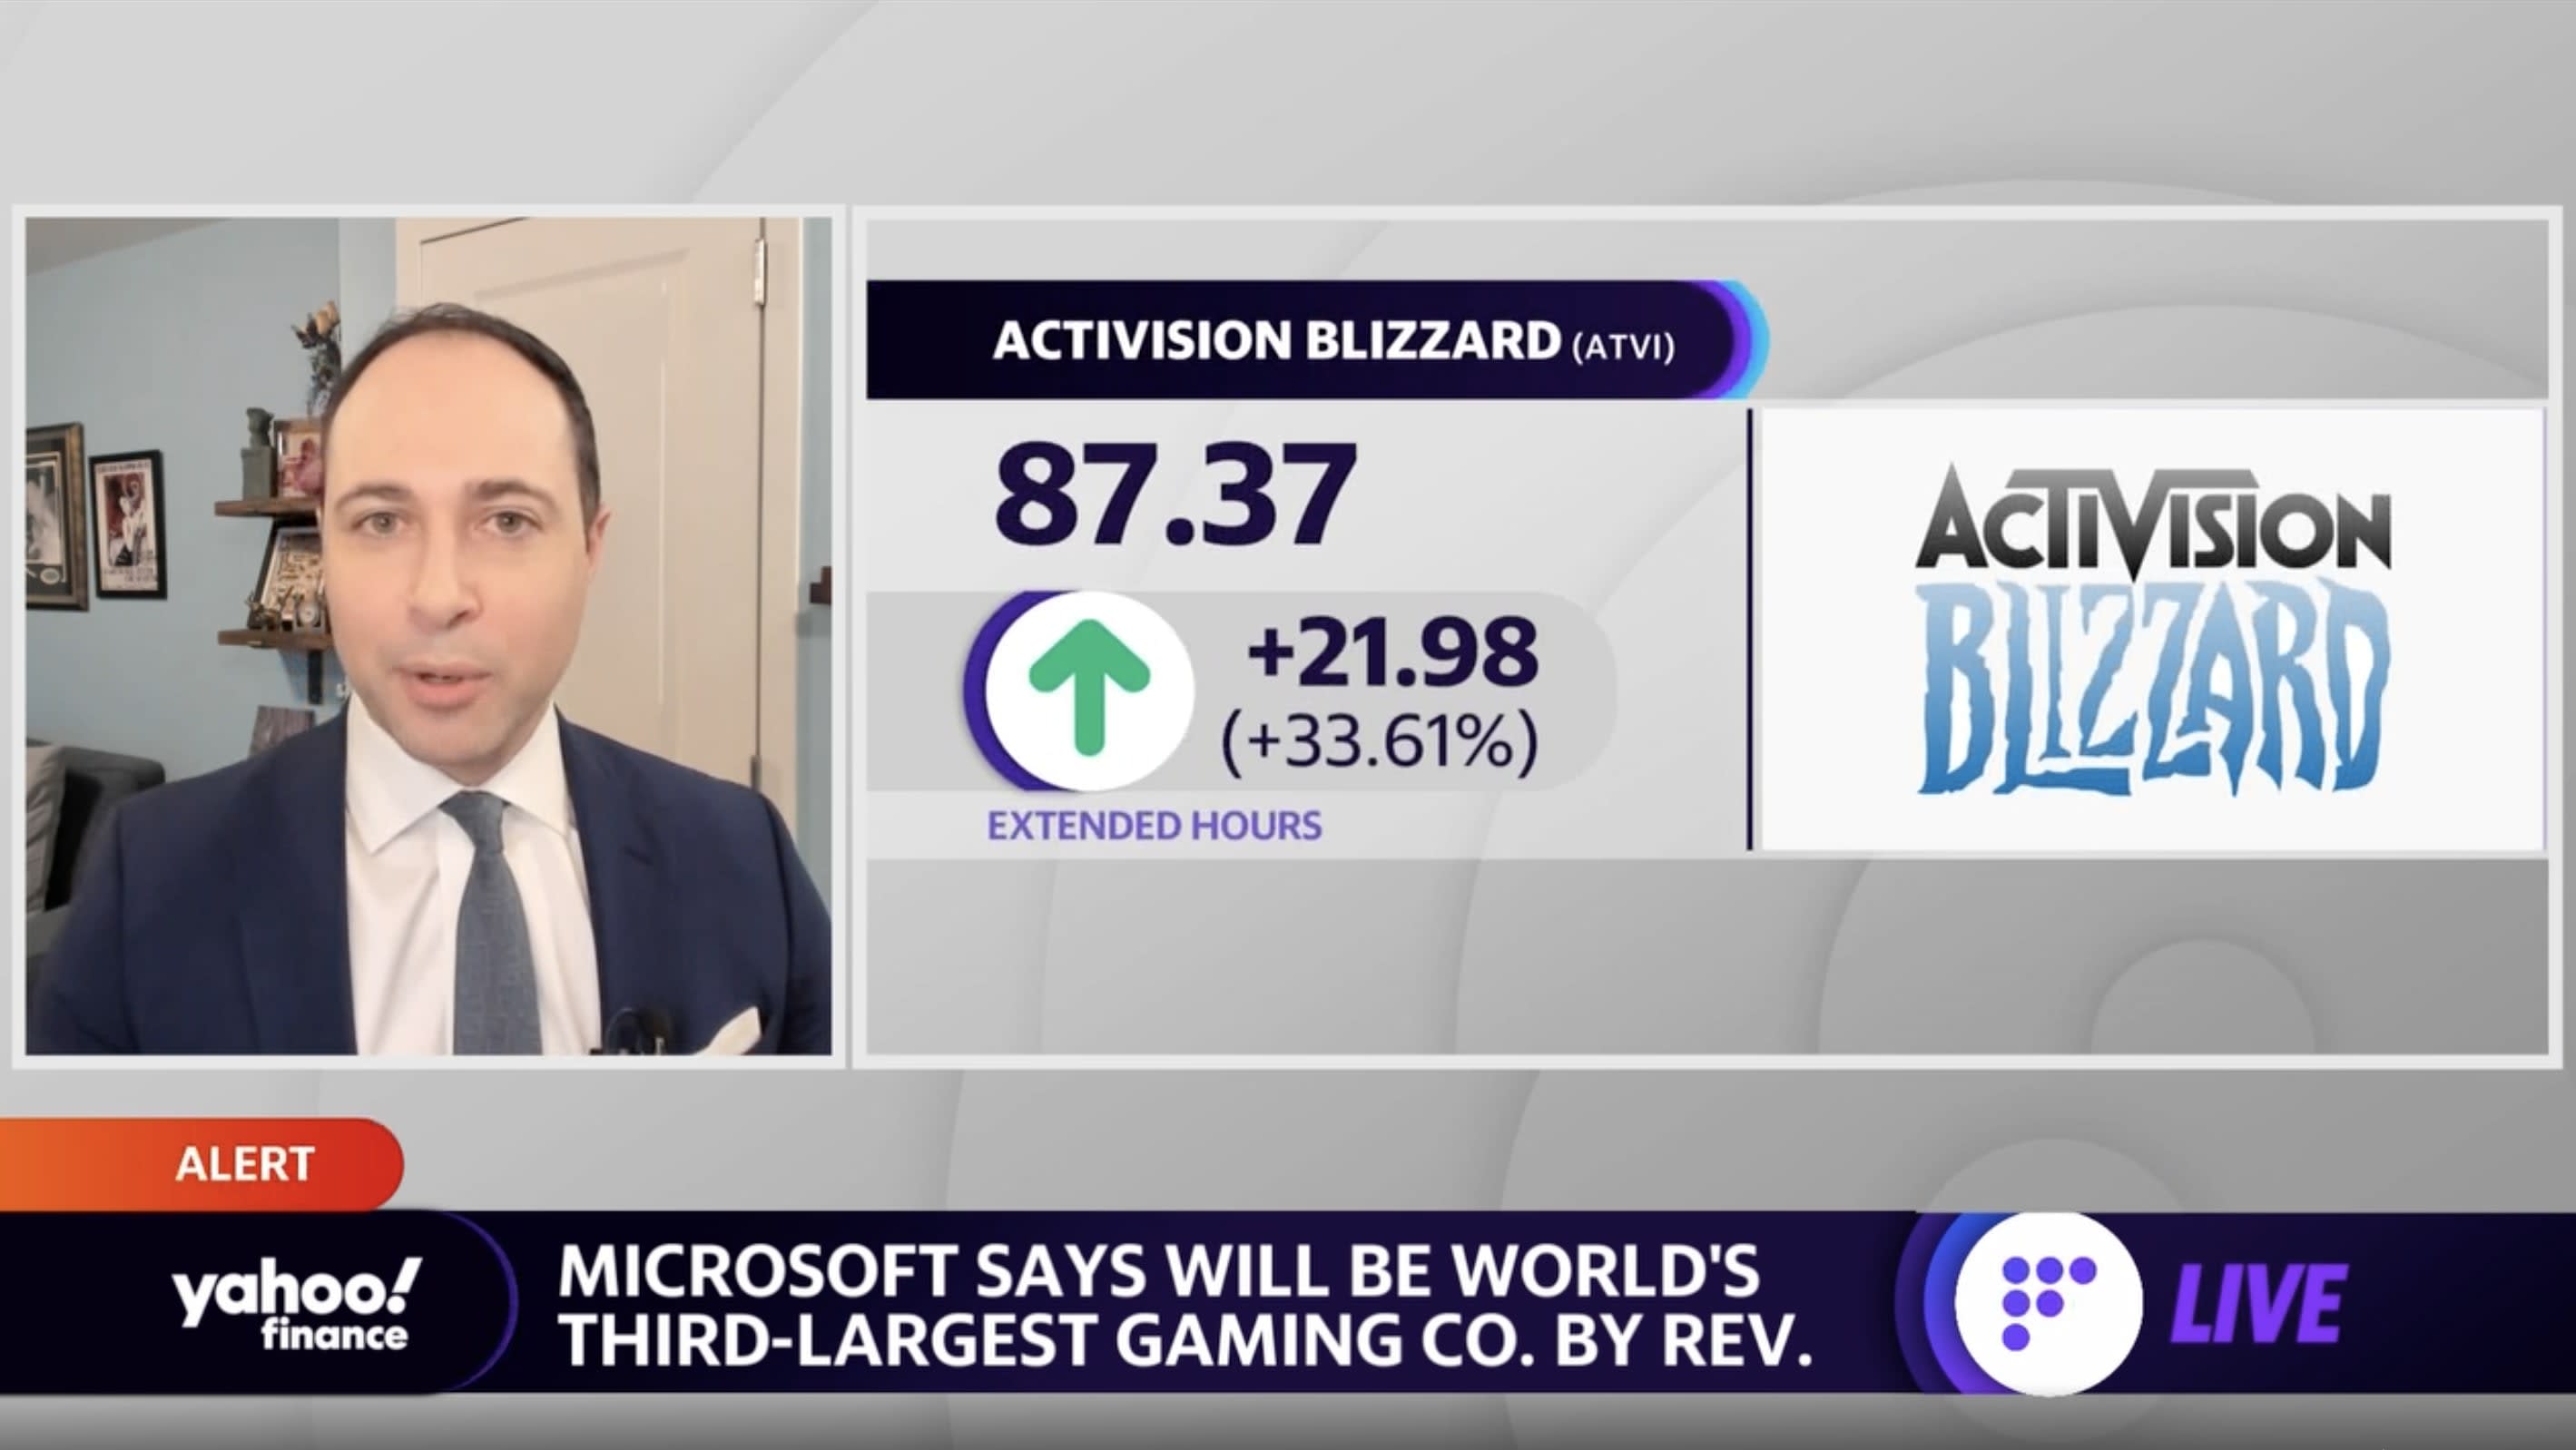 Why Activision Blizzard Stock Jumped 27.7% in the First Half of